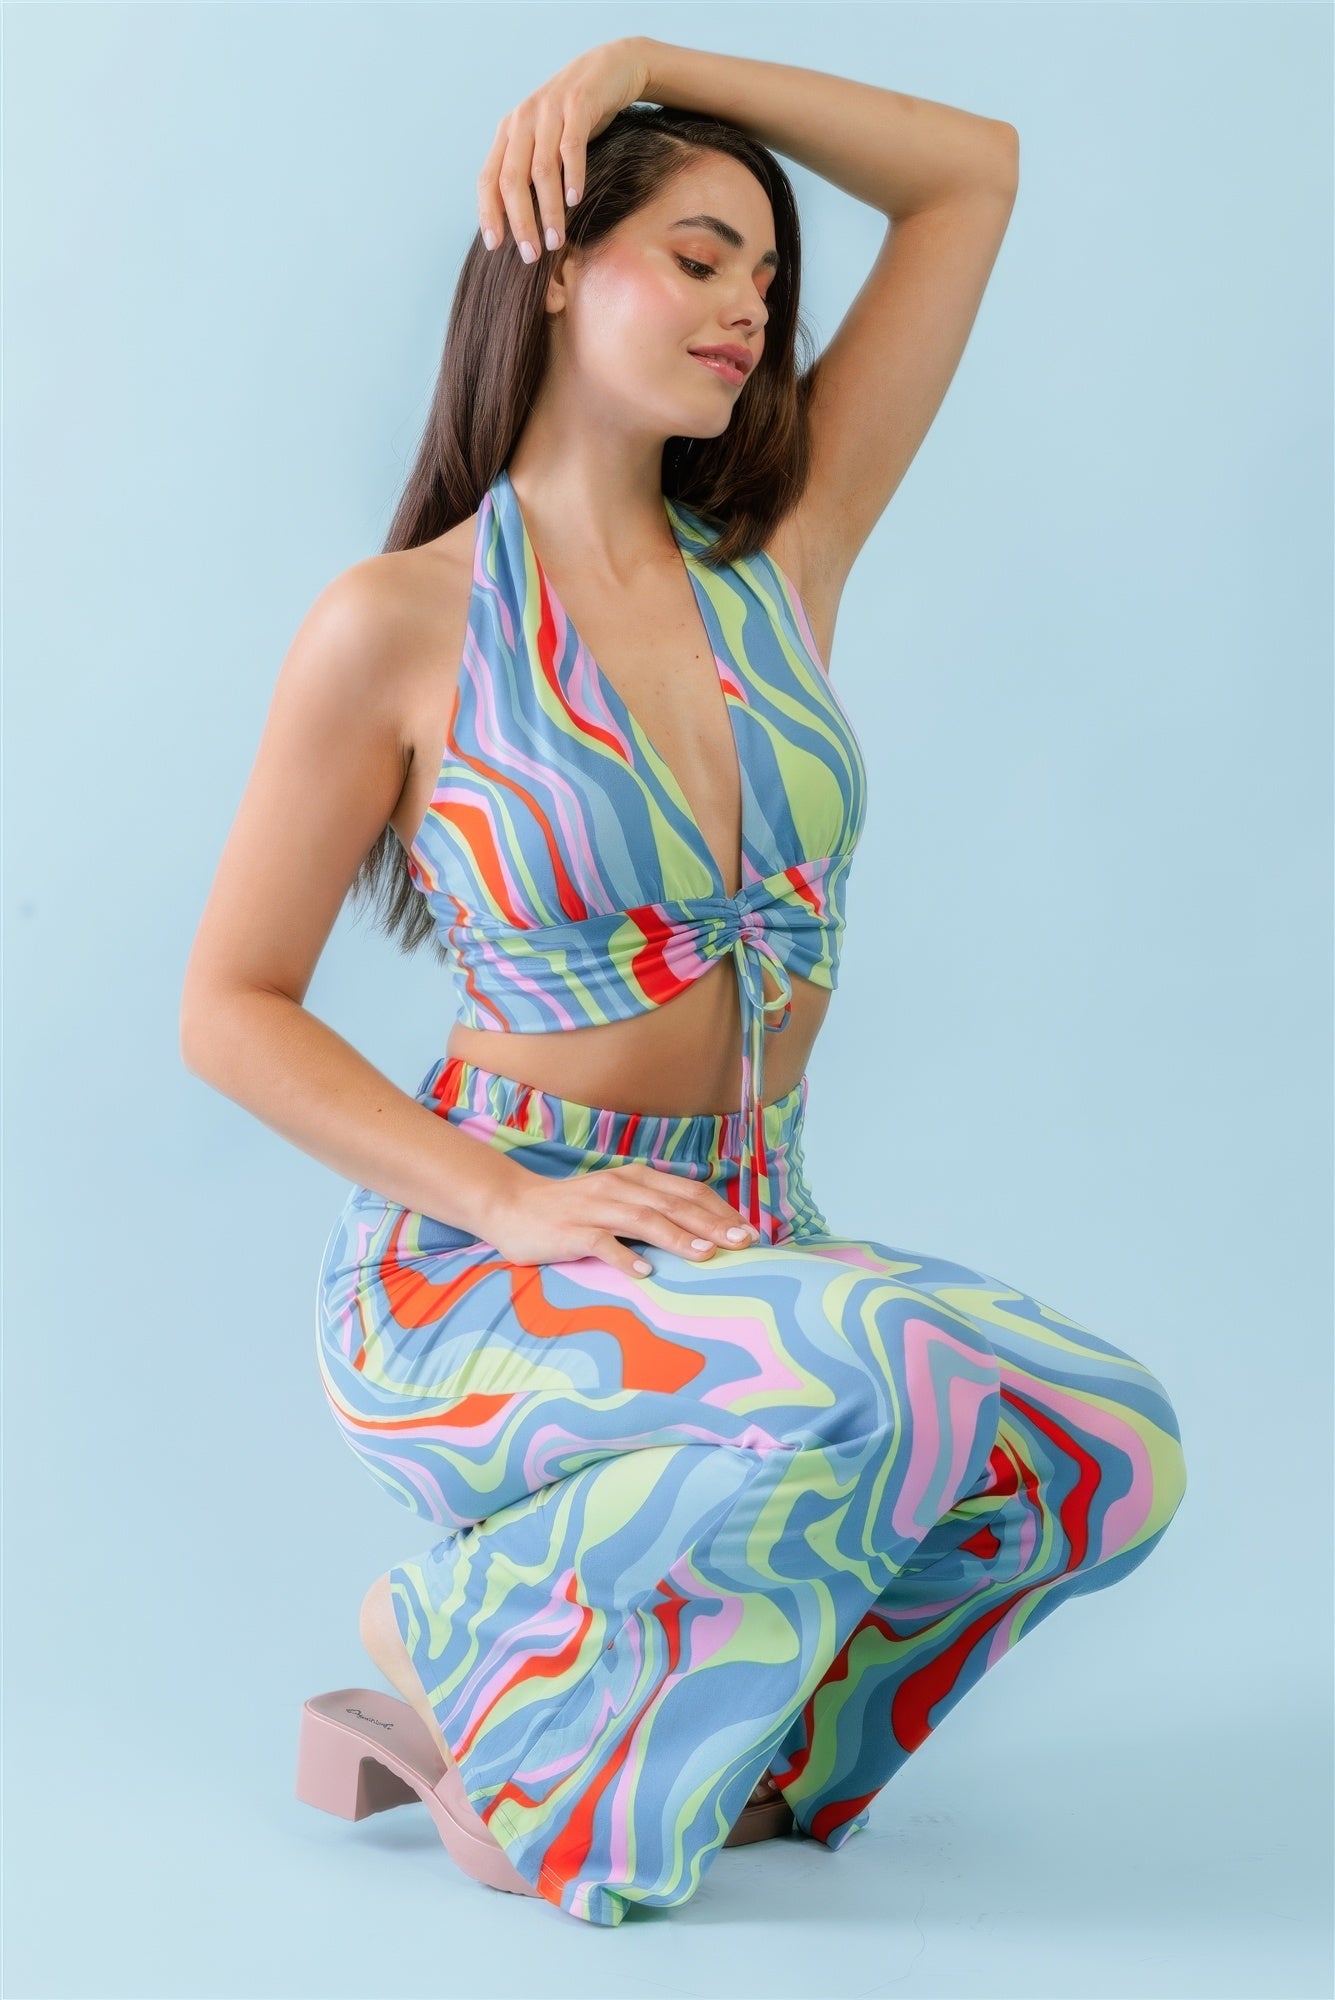 Blue Zone Planet |  Suzy's Multicolor Abstract Print Halter V-neck Ruched Open Back Crop Top & High Waist Pants Set Blue Zone Planet